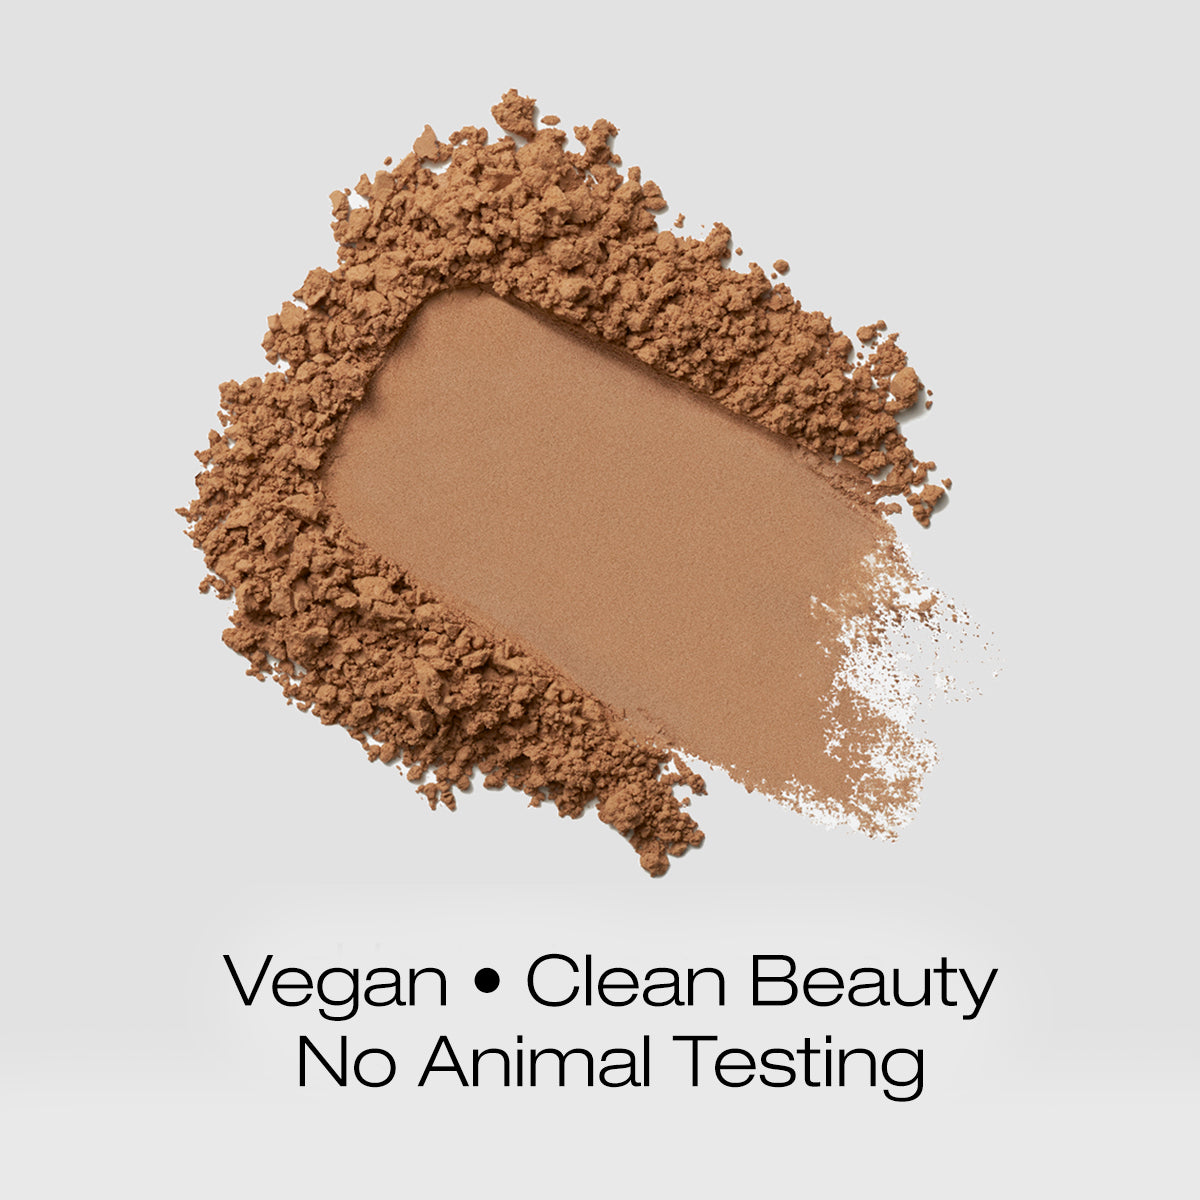 a swatch of tan colored foundation powder indicating that the formula is vegan, clean beauty and is not tested on animals